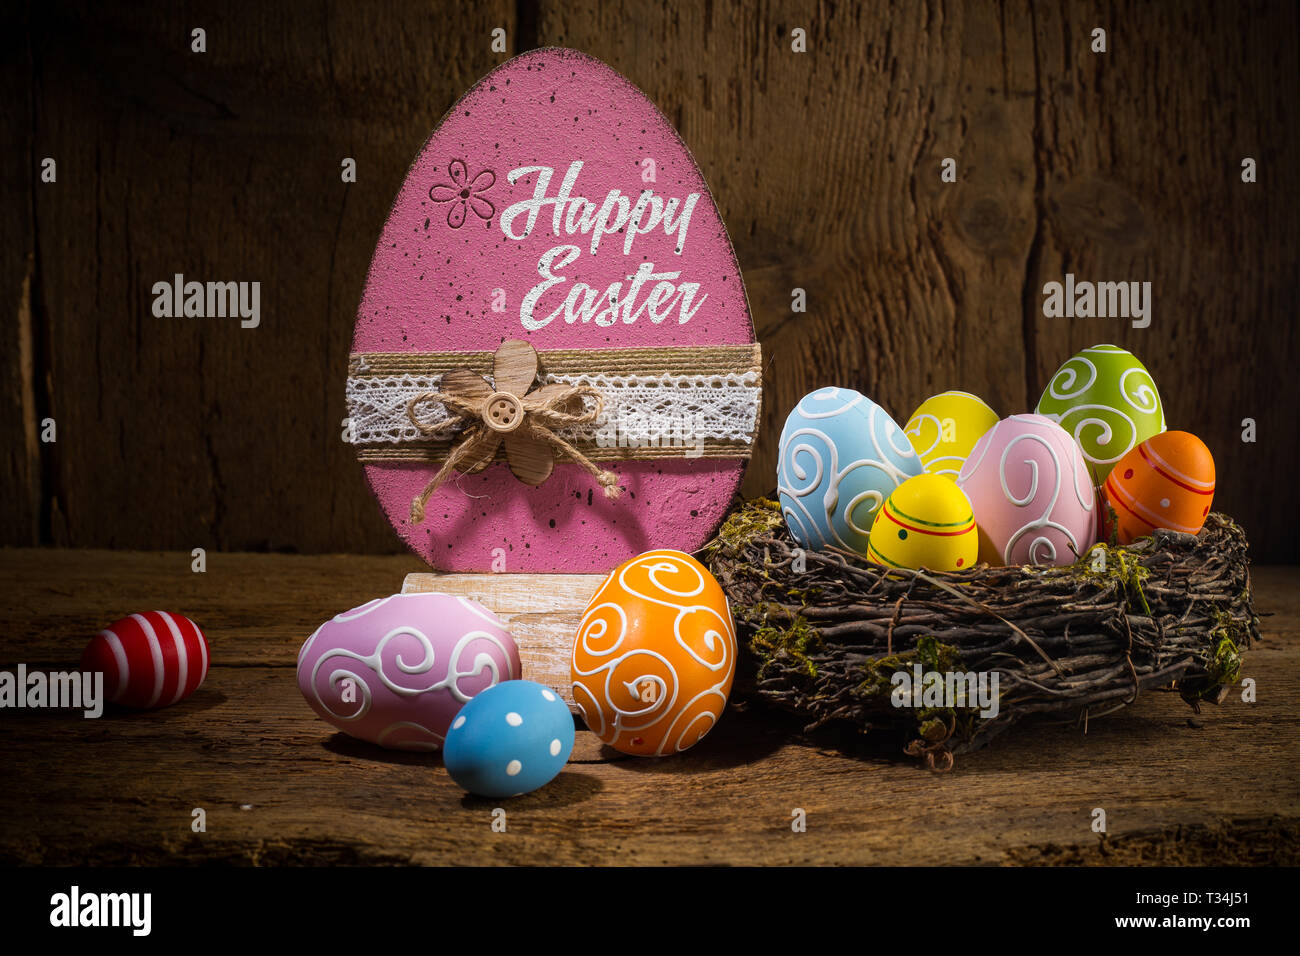 Colorful painted happy easter greeting card eggs in birds nest basket on rustic wooden old  background Stock Photo